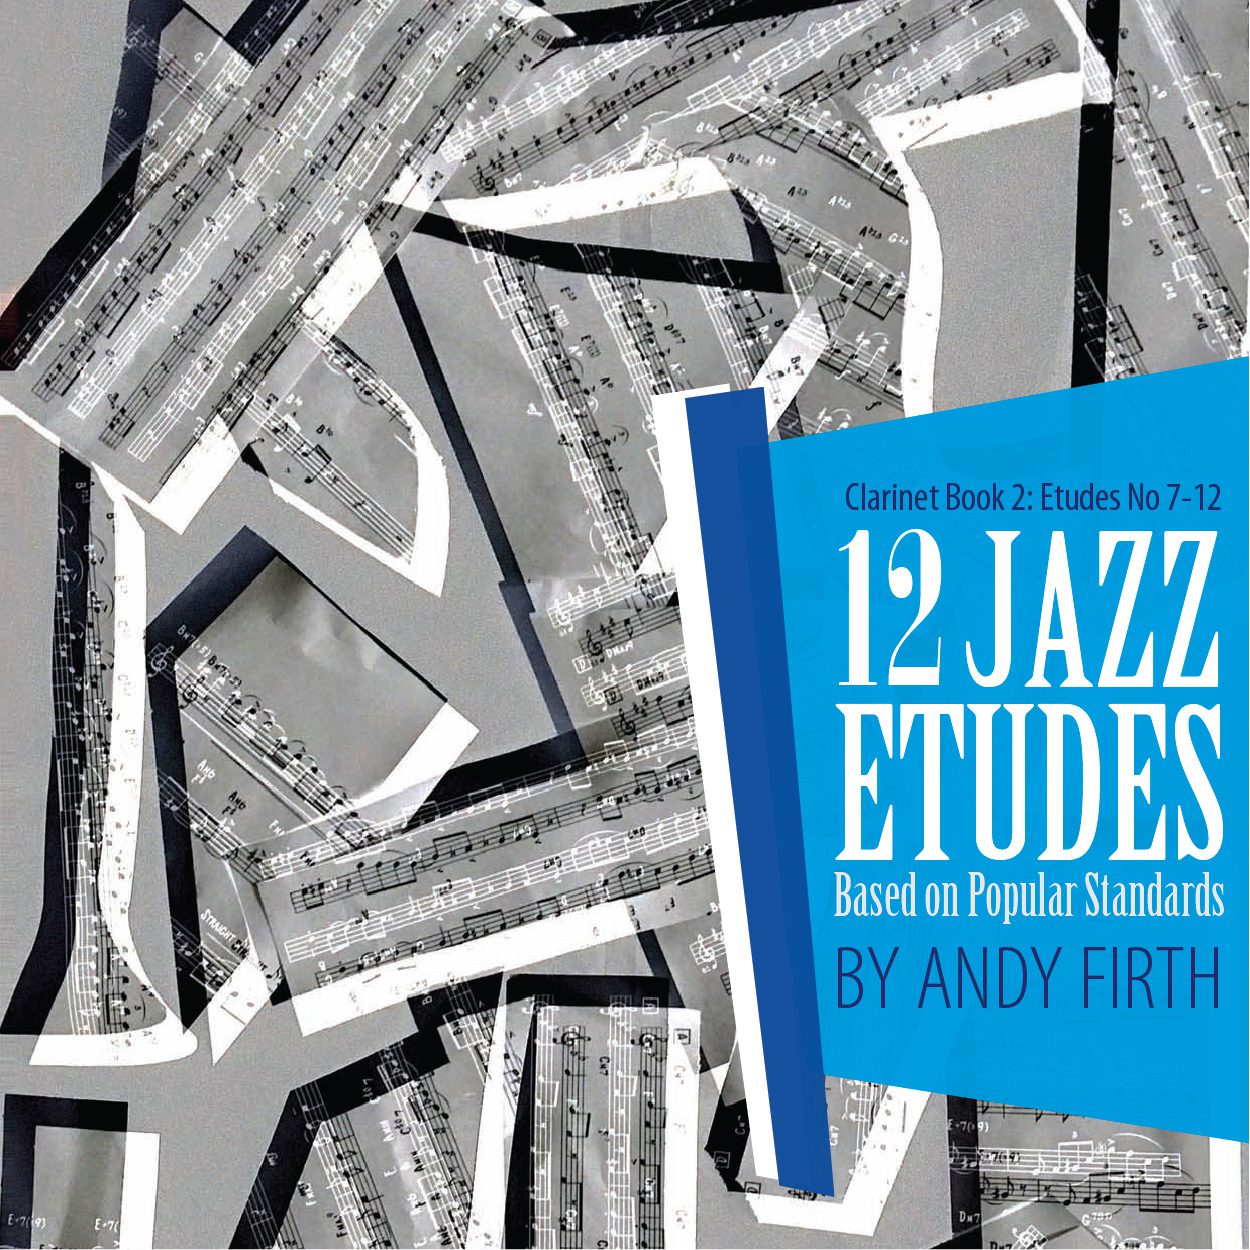 The cover to "12 Jazz Etudes Based on Popular Standards-Clarinet Book 2"